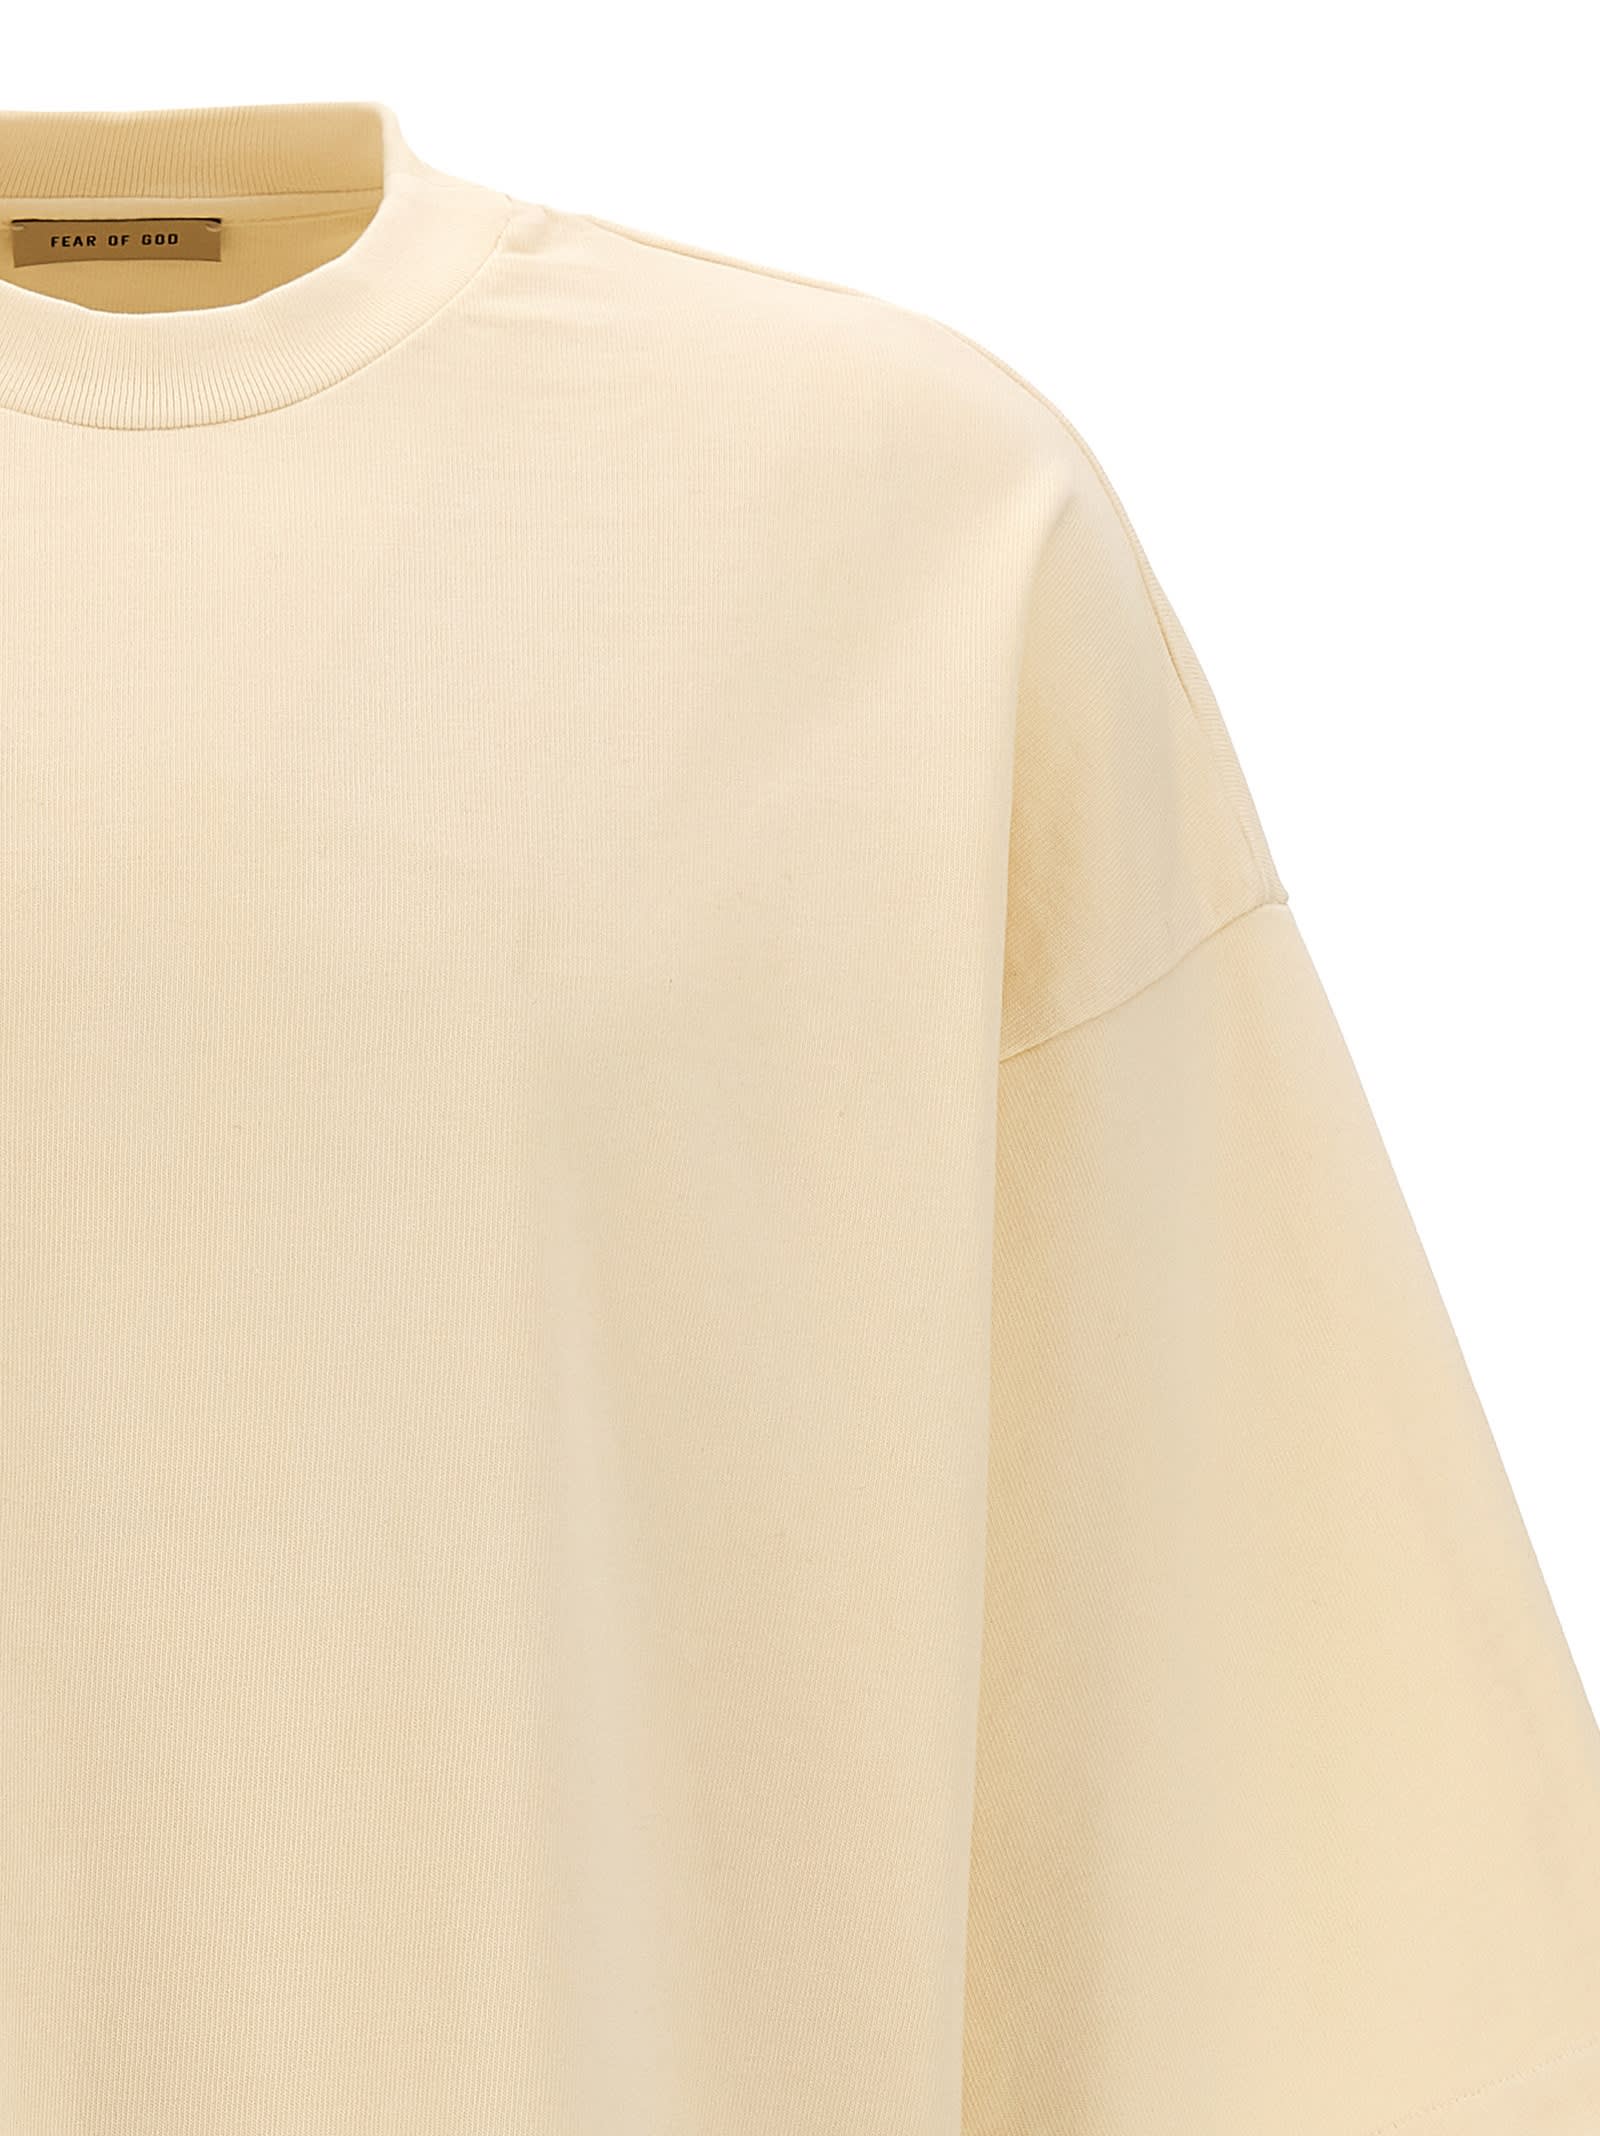 Shop Fear Of God Airbrush 8 Ss Tee T-shirt In Beige